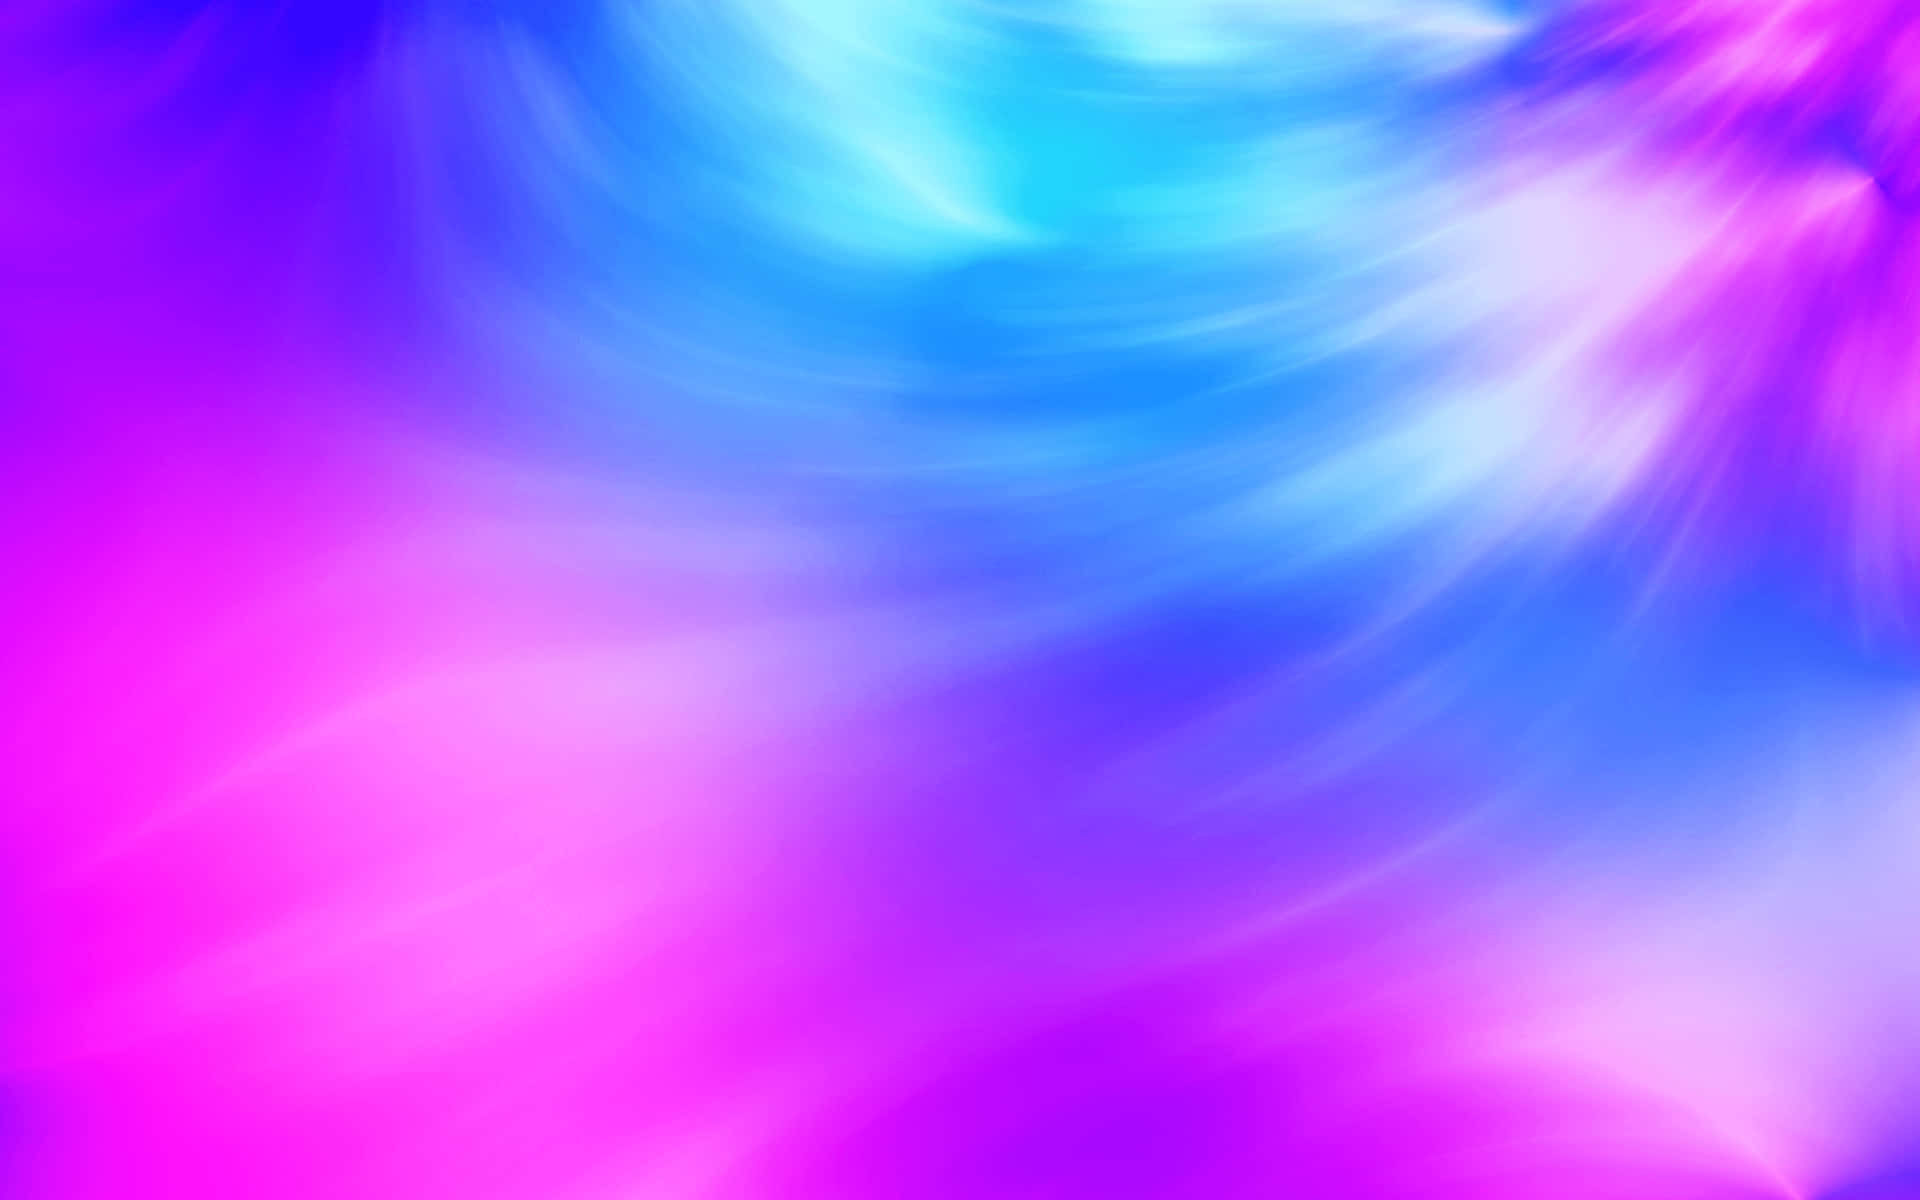 A bright, blue and purple abstract desktop Wallpaper